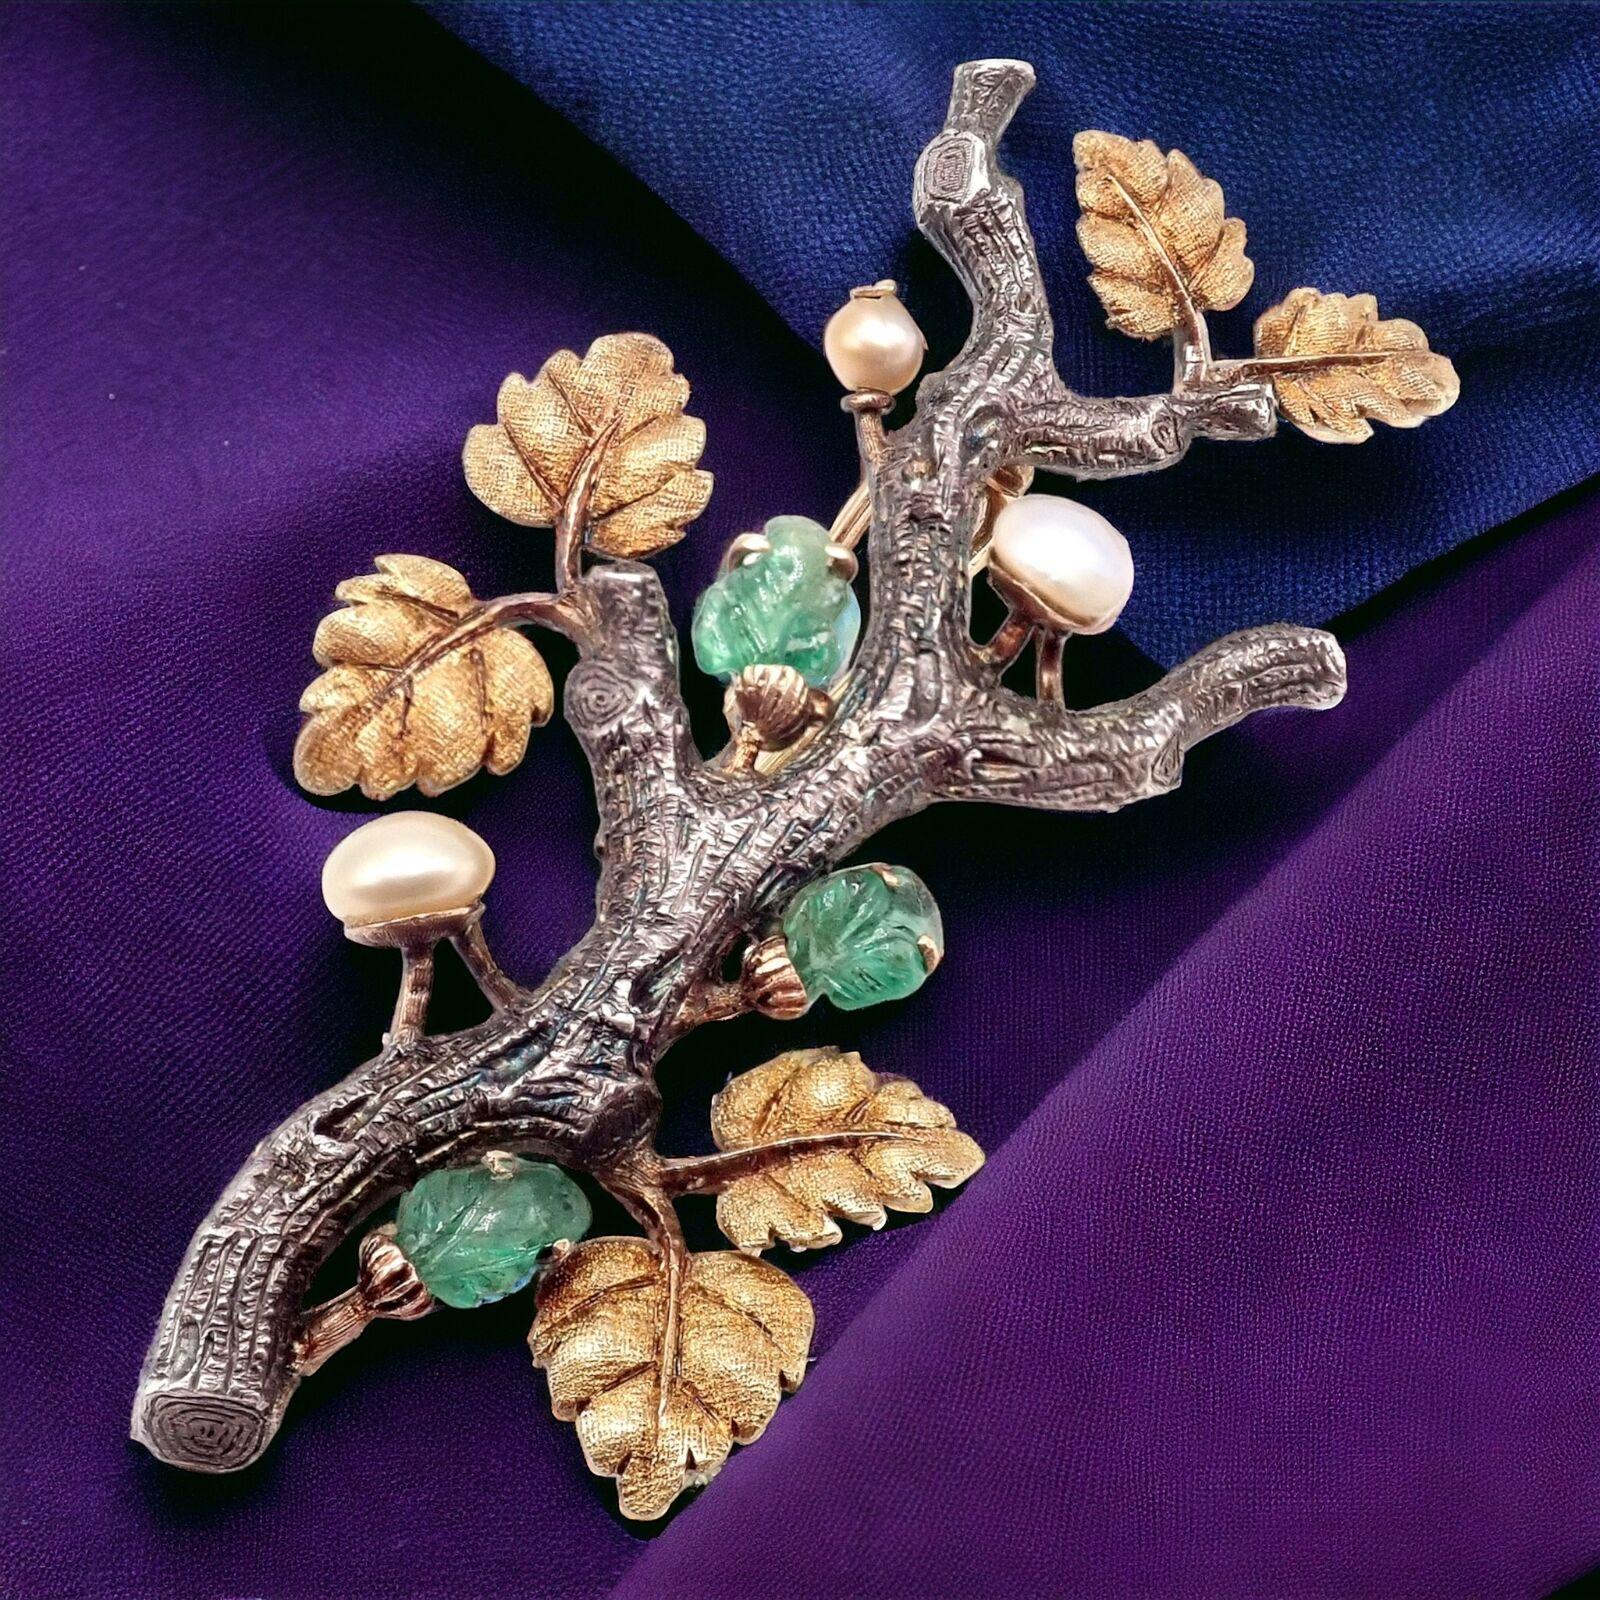 18k Yellow & White Gold Vintage Twig Carved Emerald Pearl Brooch Pin by Buccellati. 
This Vintage Buccellati brooch pin is a splendid example of fine jewelry craftsmanship. 

Crafted from 18k white and yellow gold, the brooch features a delicate,